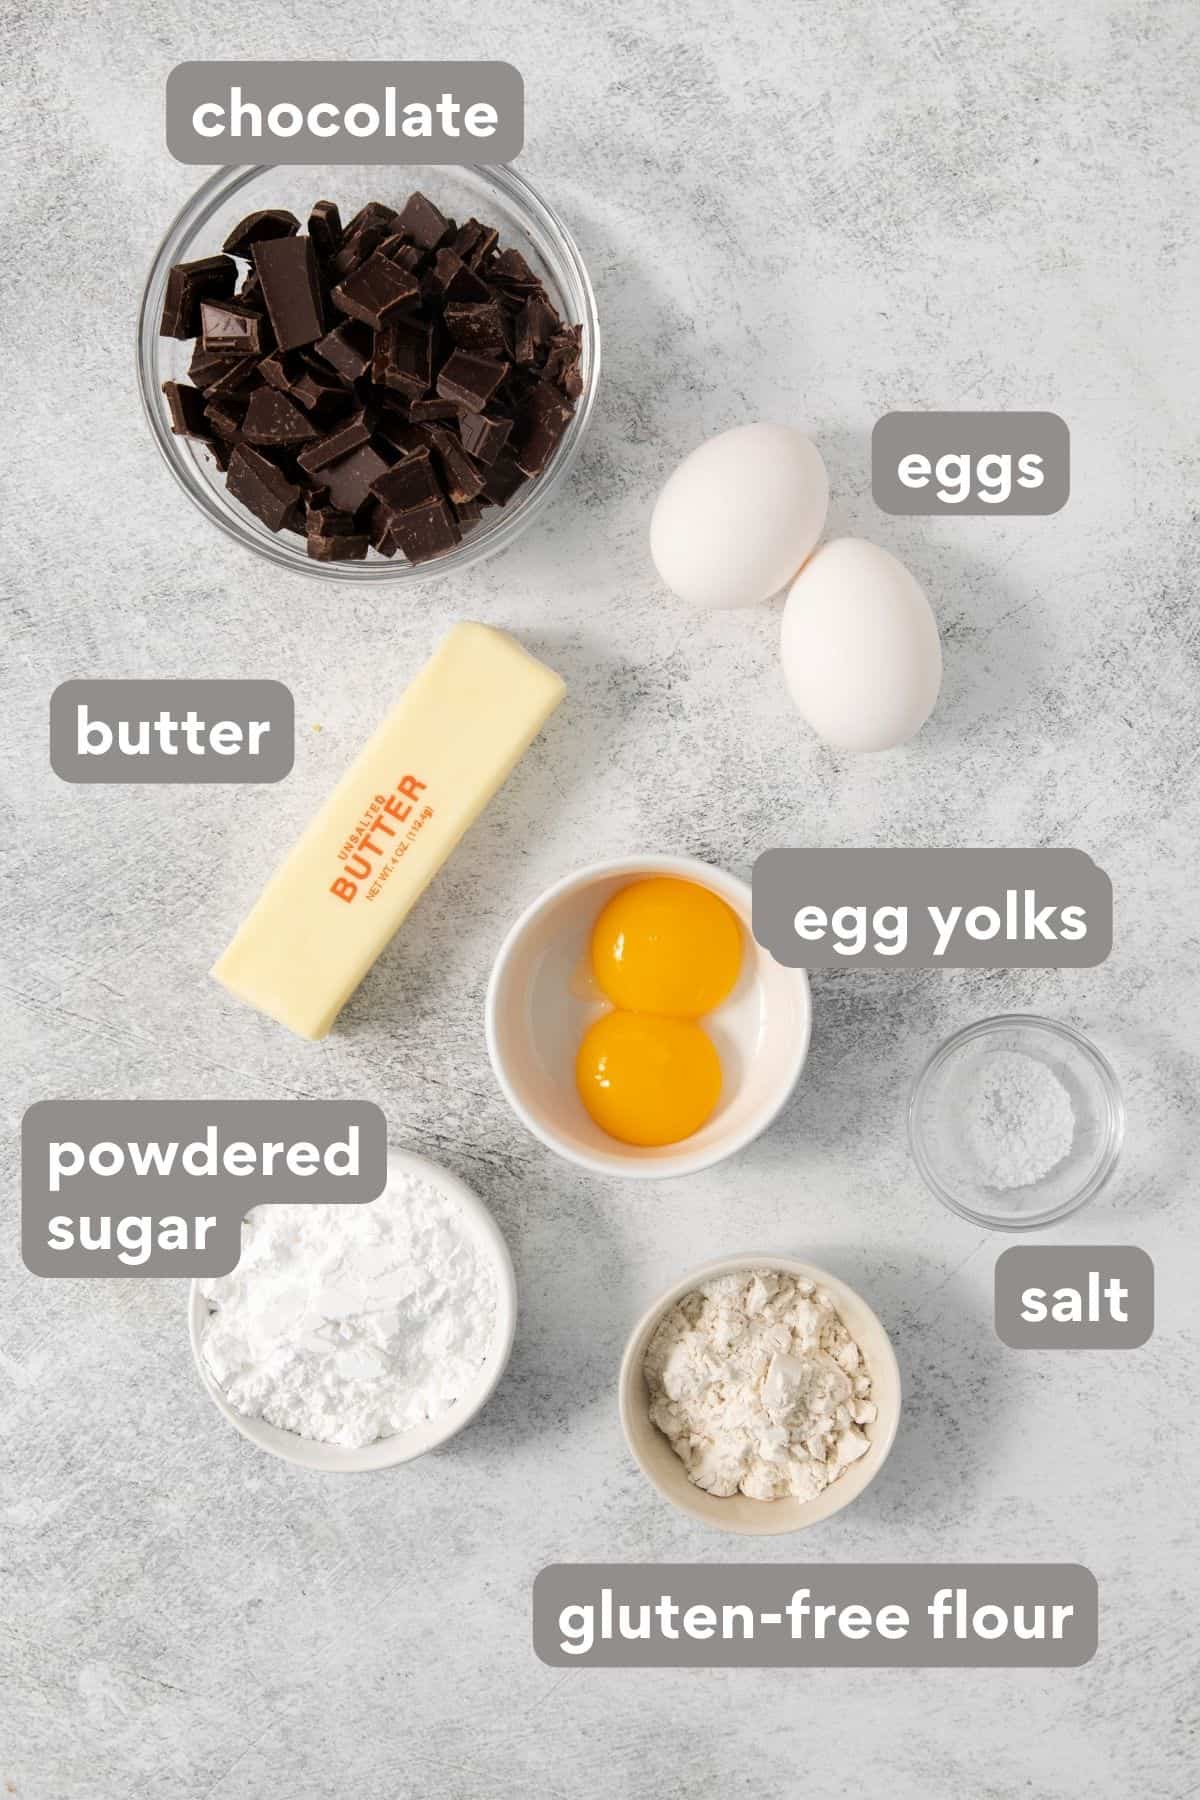 ingredients for gluten-free chocolate lava cake on a countertop